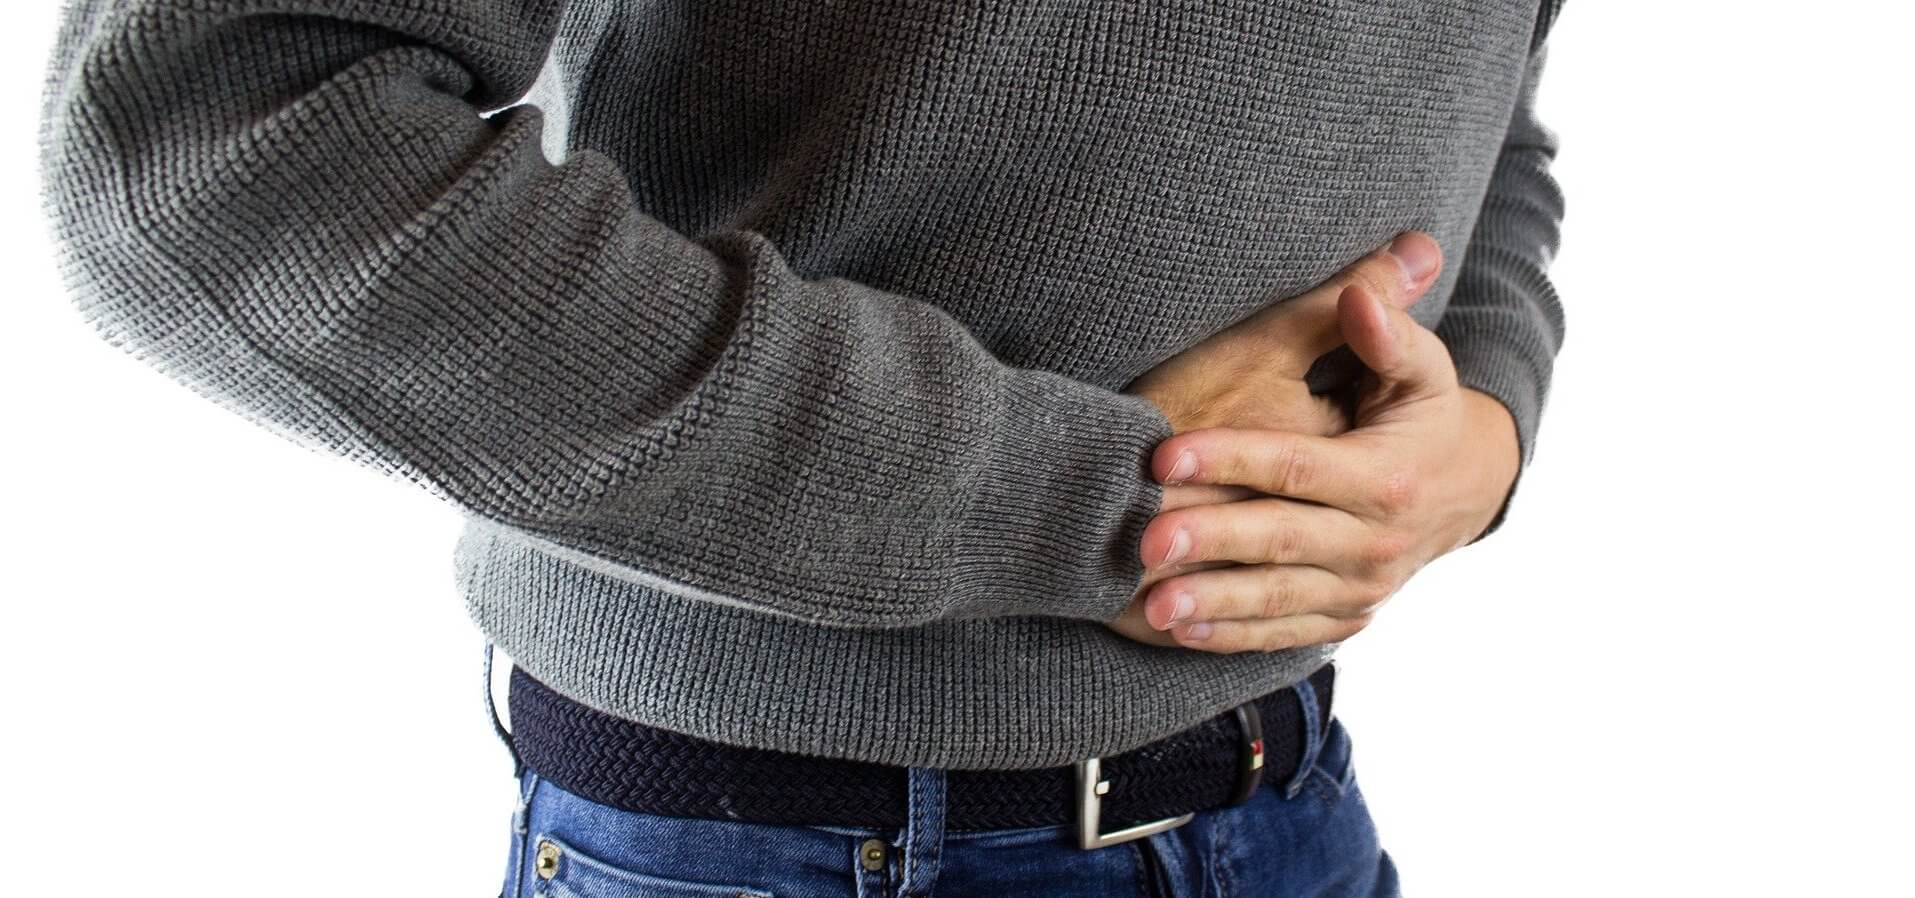 food sensitivity testing could help IBS sufferers and their bloating